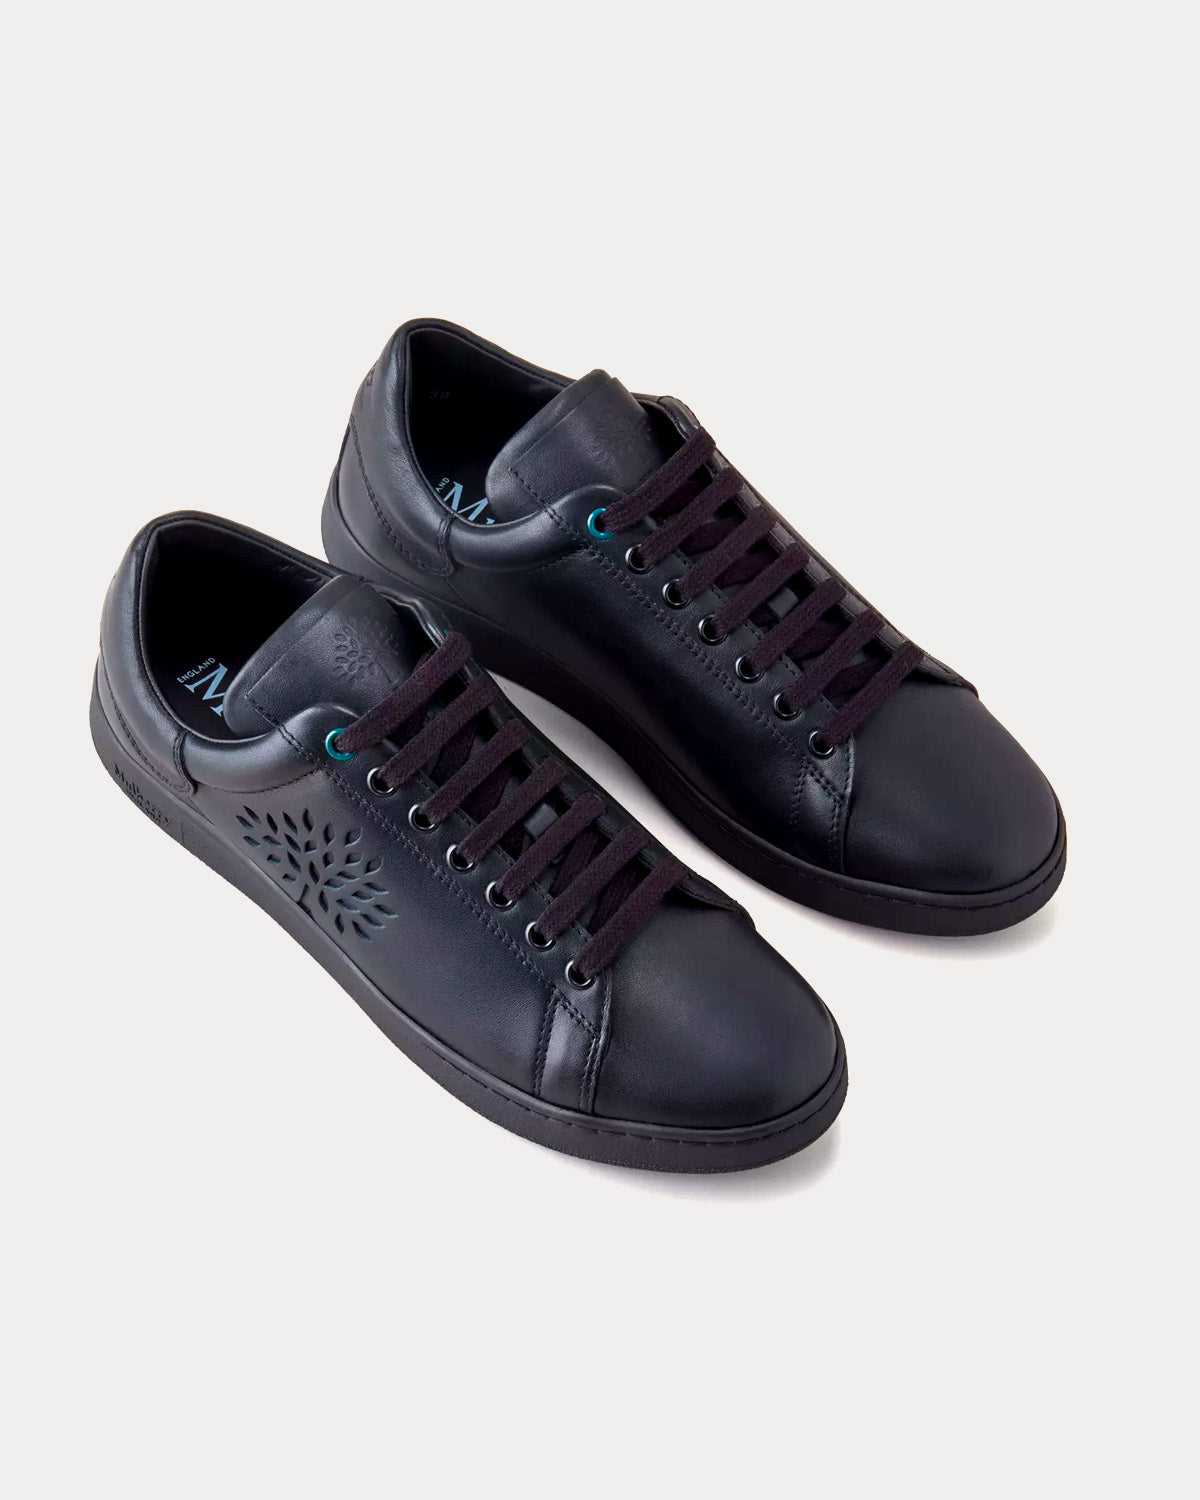 Mulberry - Tree Tennis Leather Black Low Top Sneakers